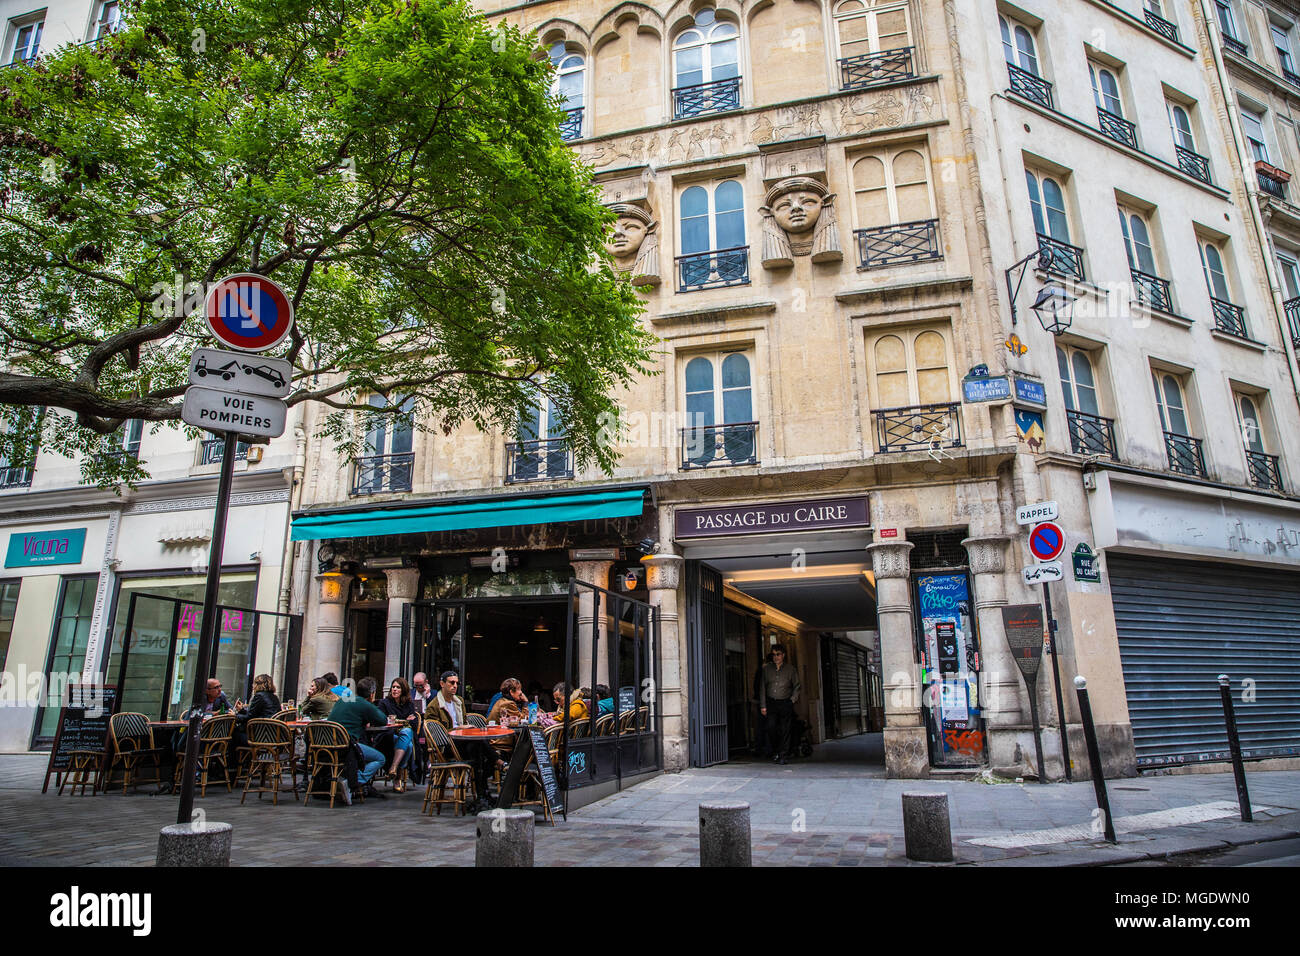 Entrance of the Passage du Nil, on the Place du Caire, in the center of Paris Stock Photo